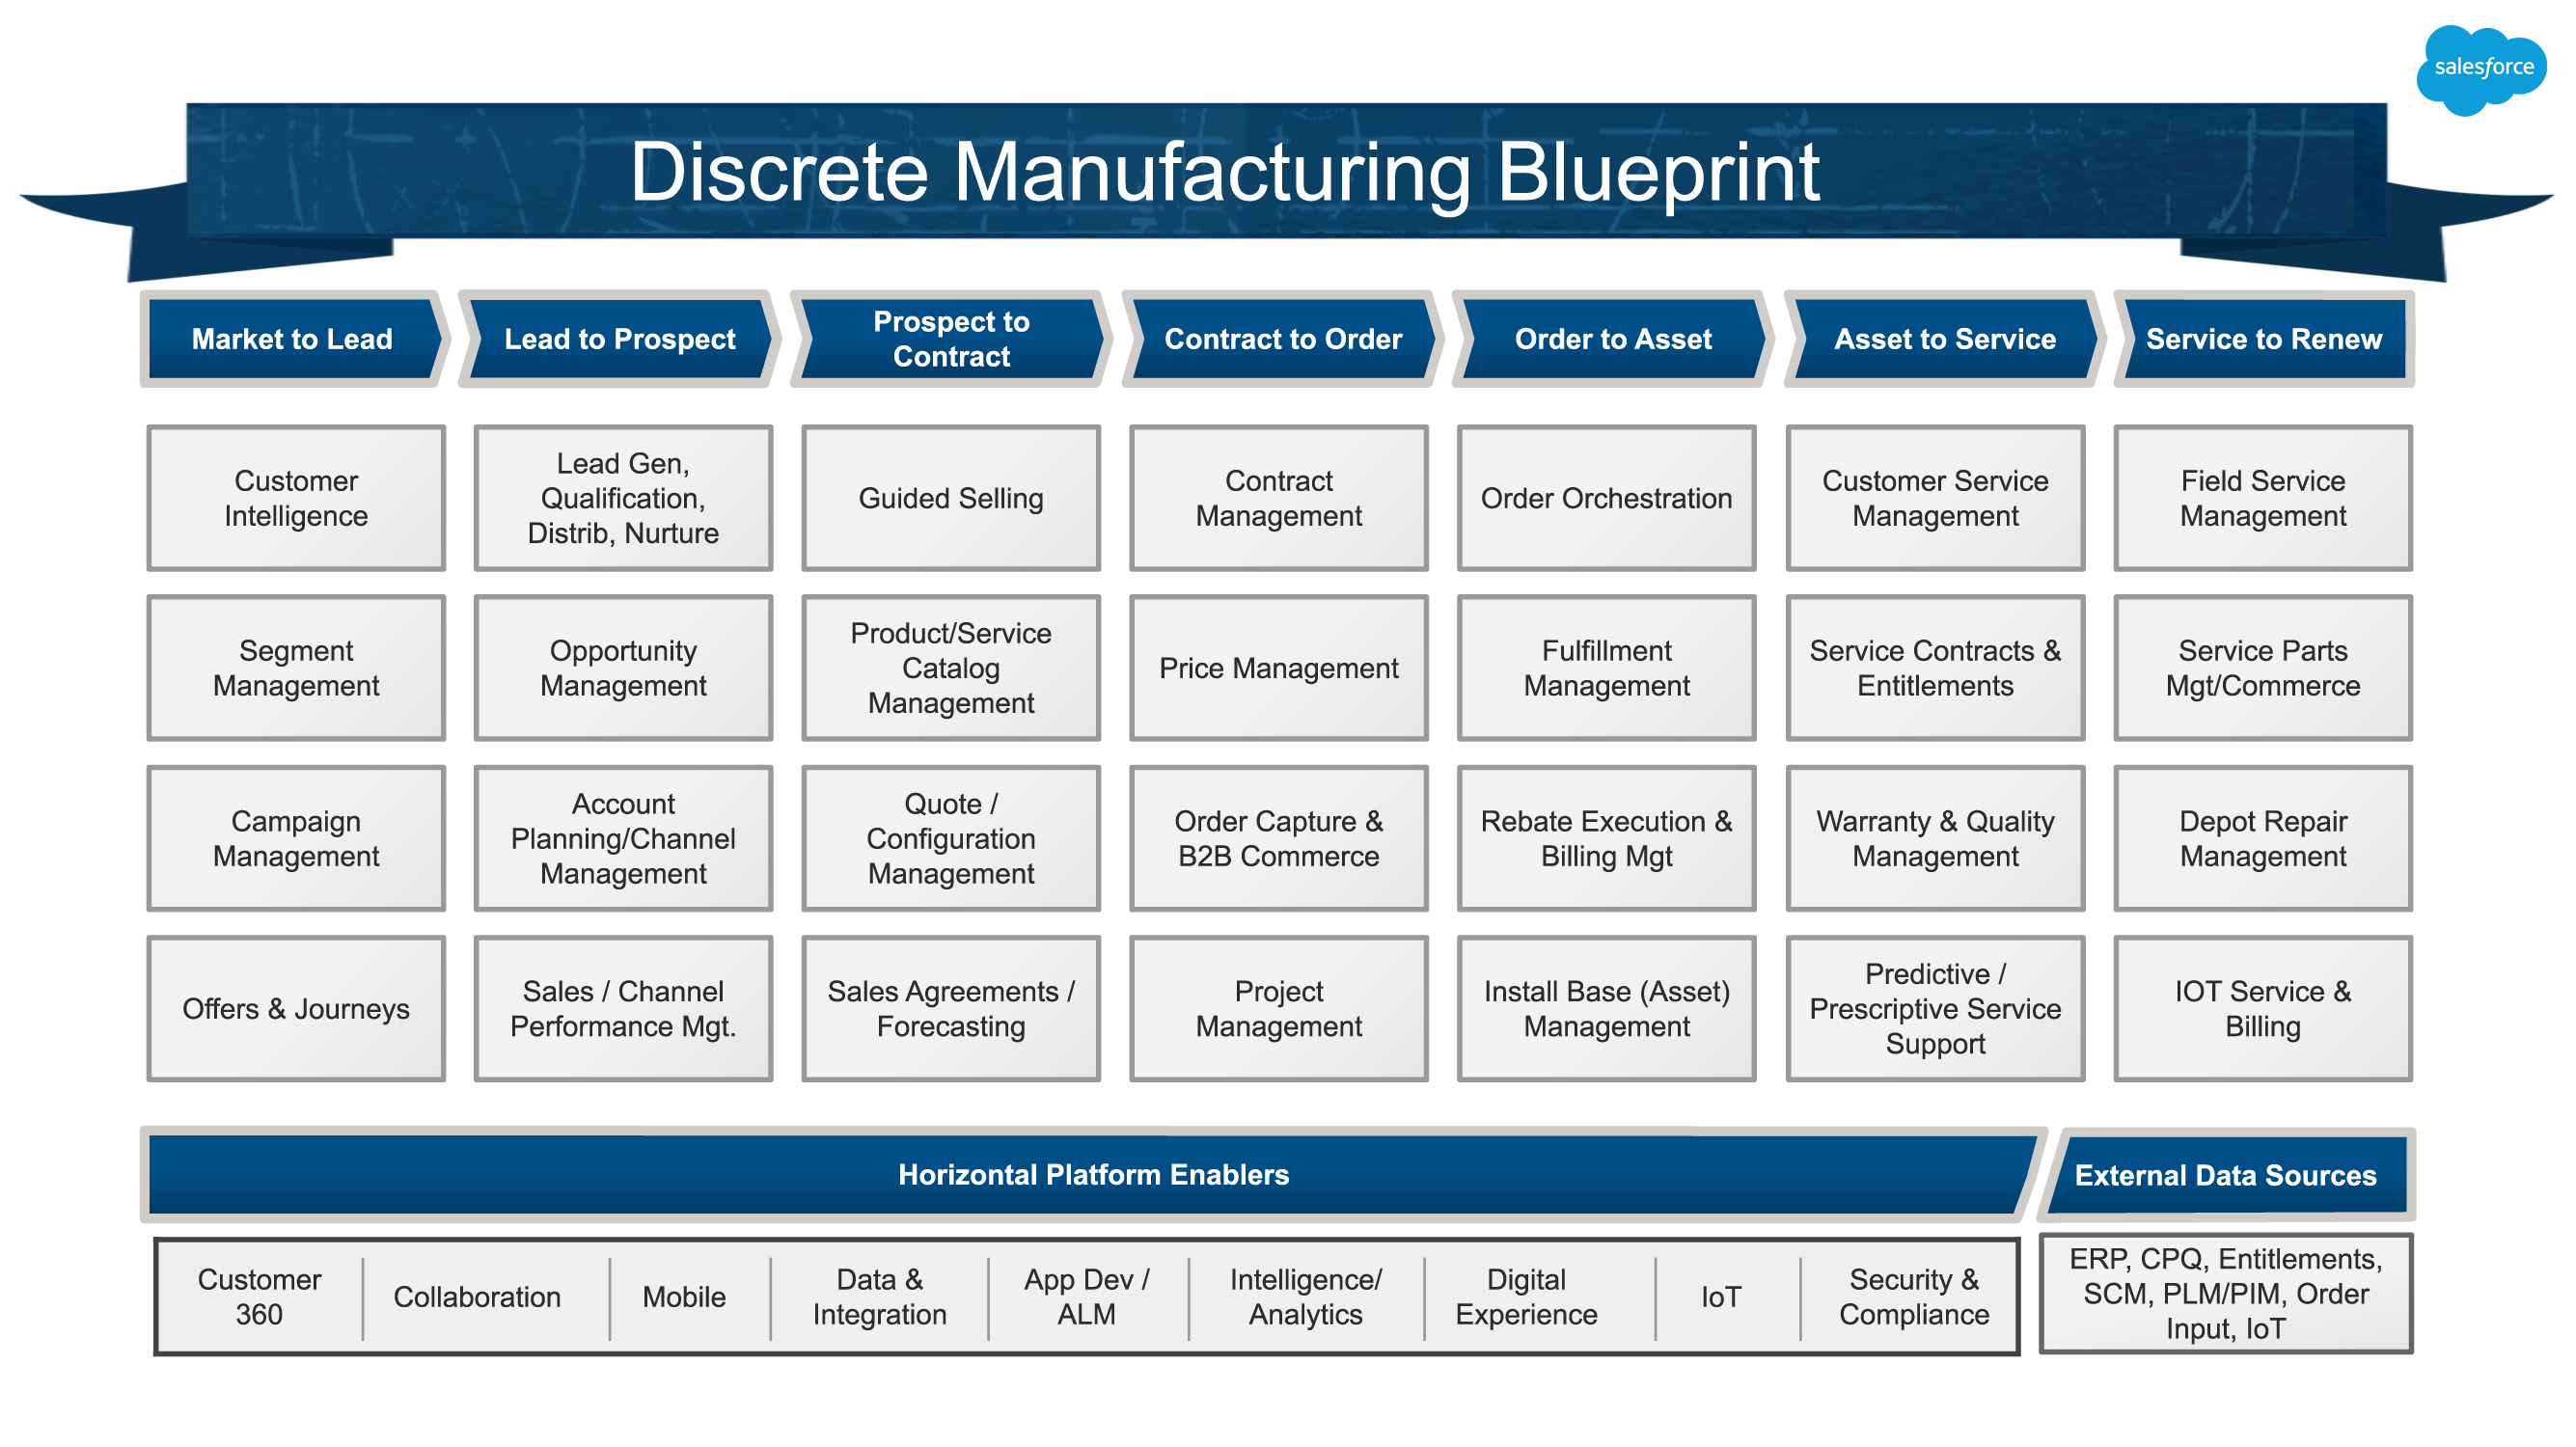 B2B Industry Blueprint for Discrete Manufacturing